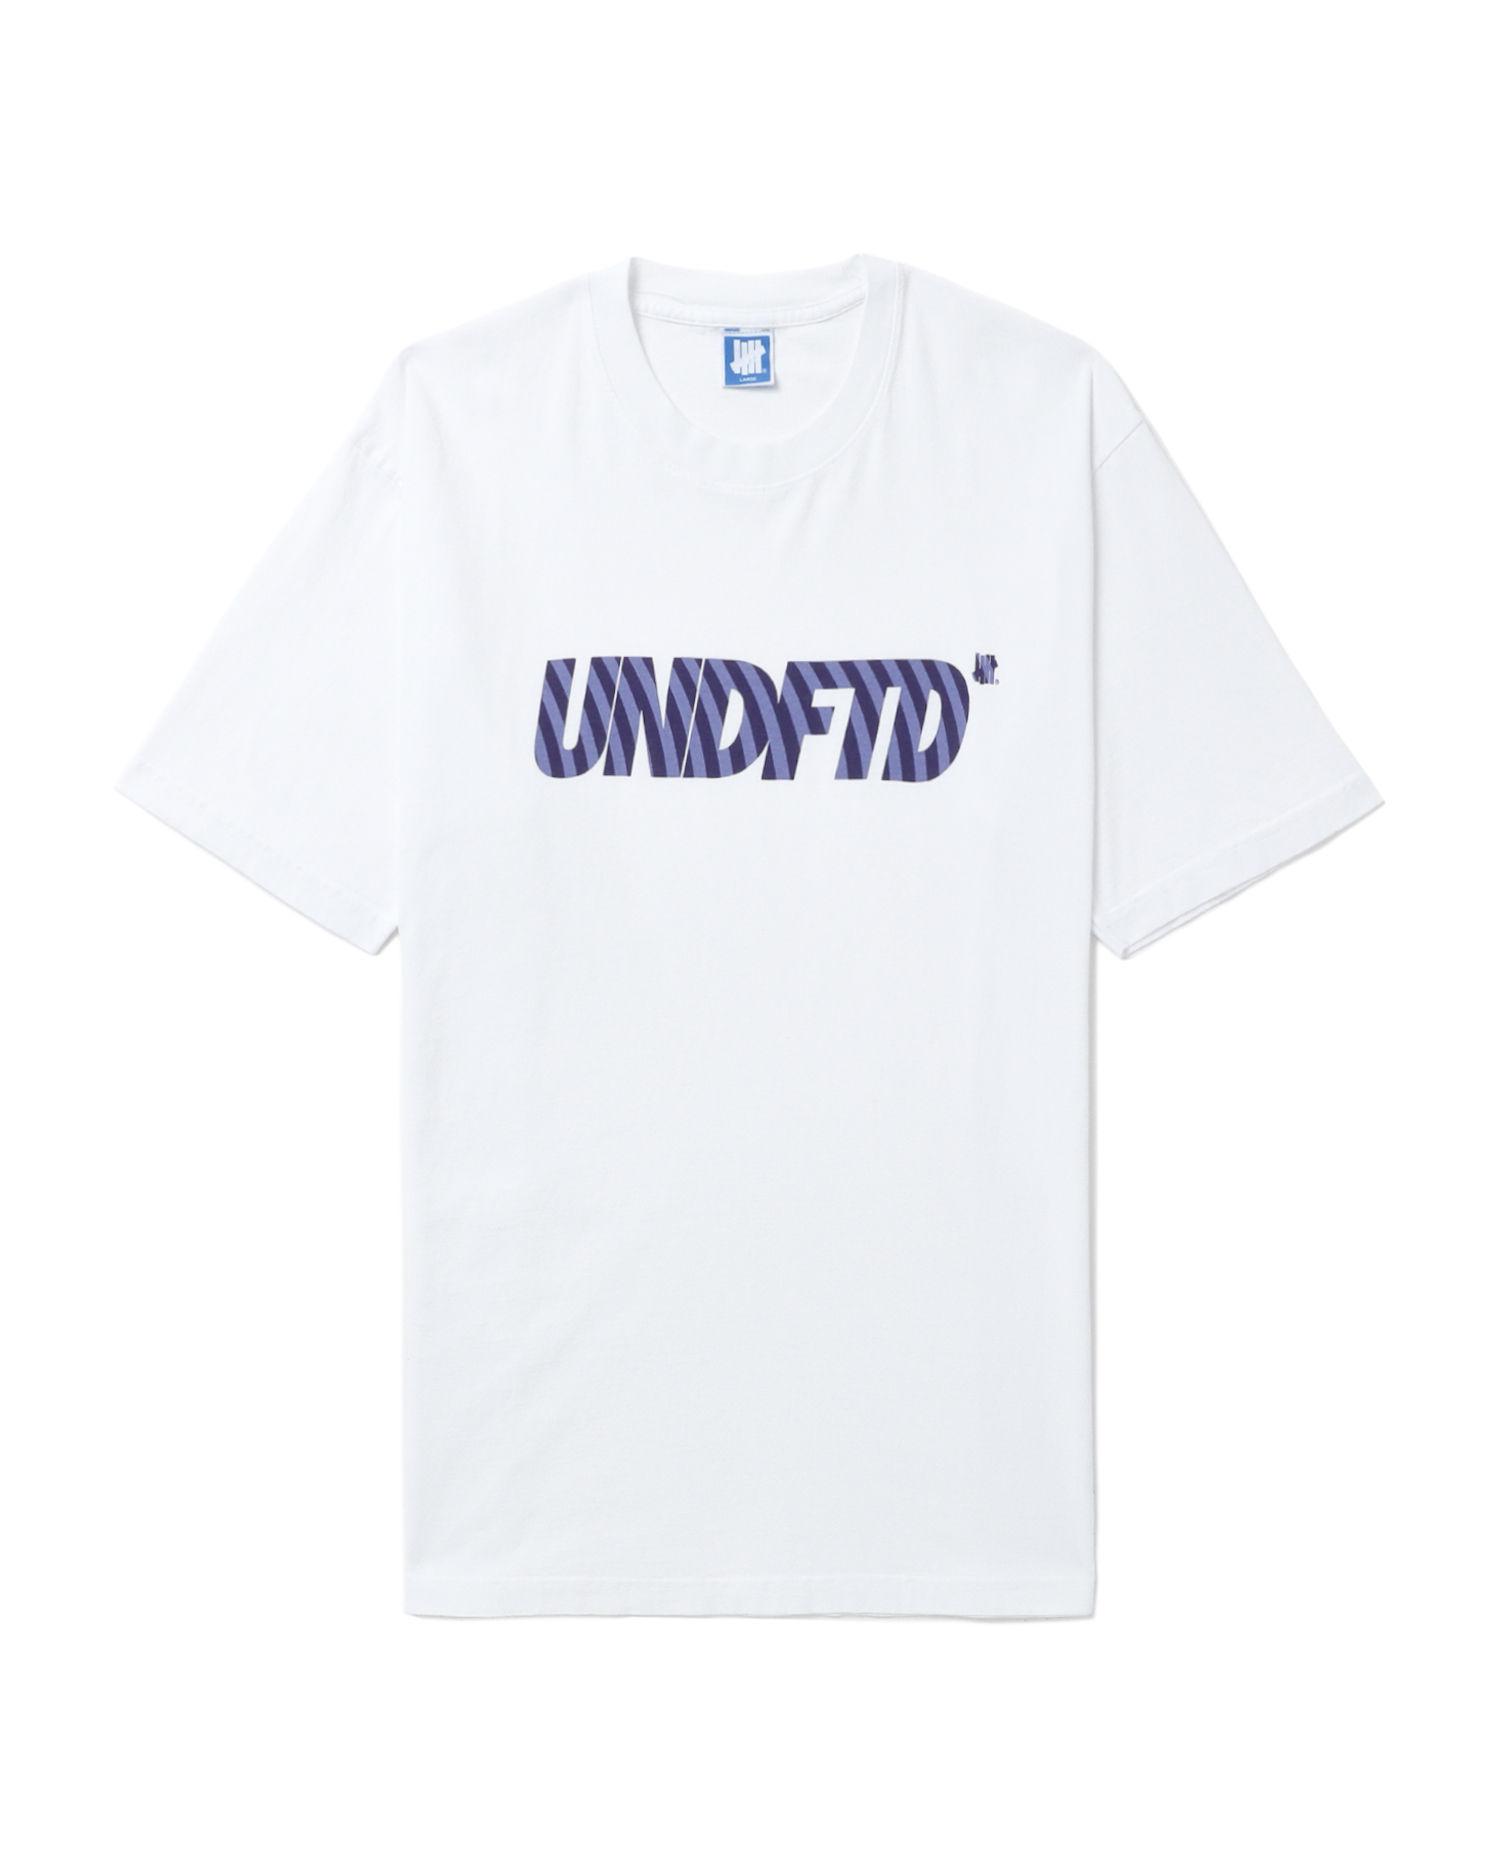 Sporting goods L/S tee by UNDEFEATED | jellibeans